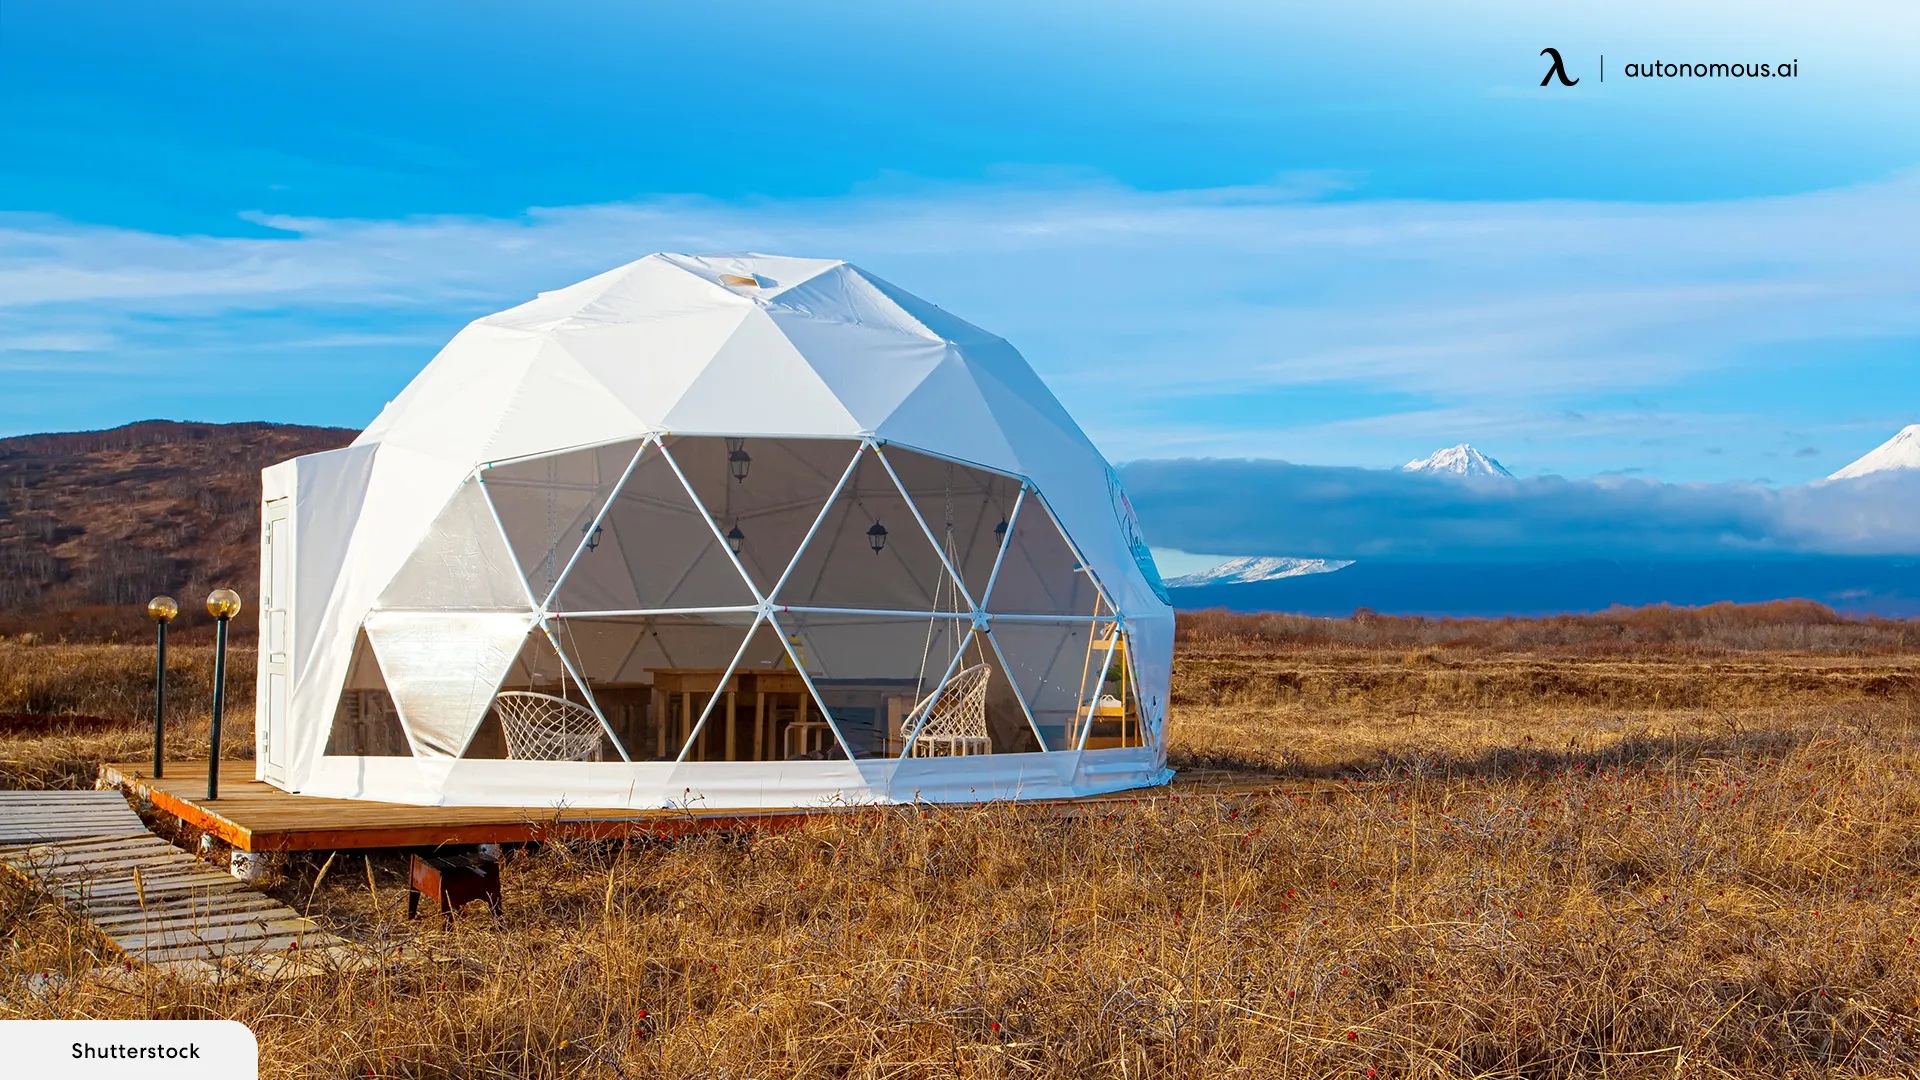 Geodesic Dome House: The Future of Eco-friendly and Efficient Living